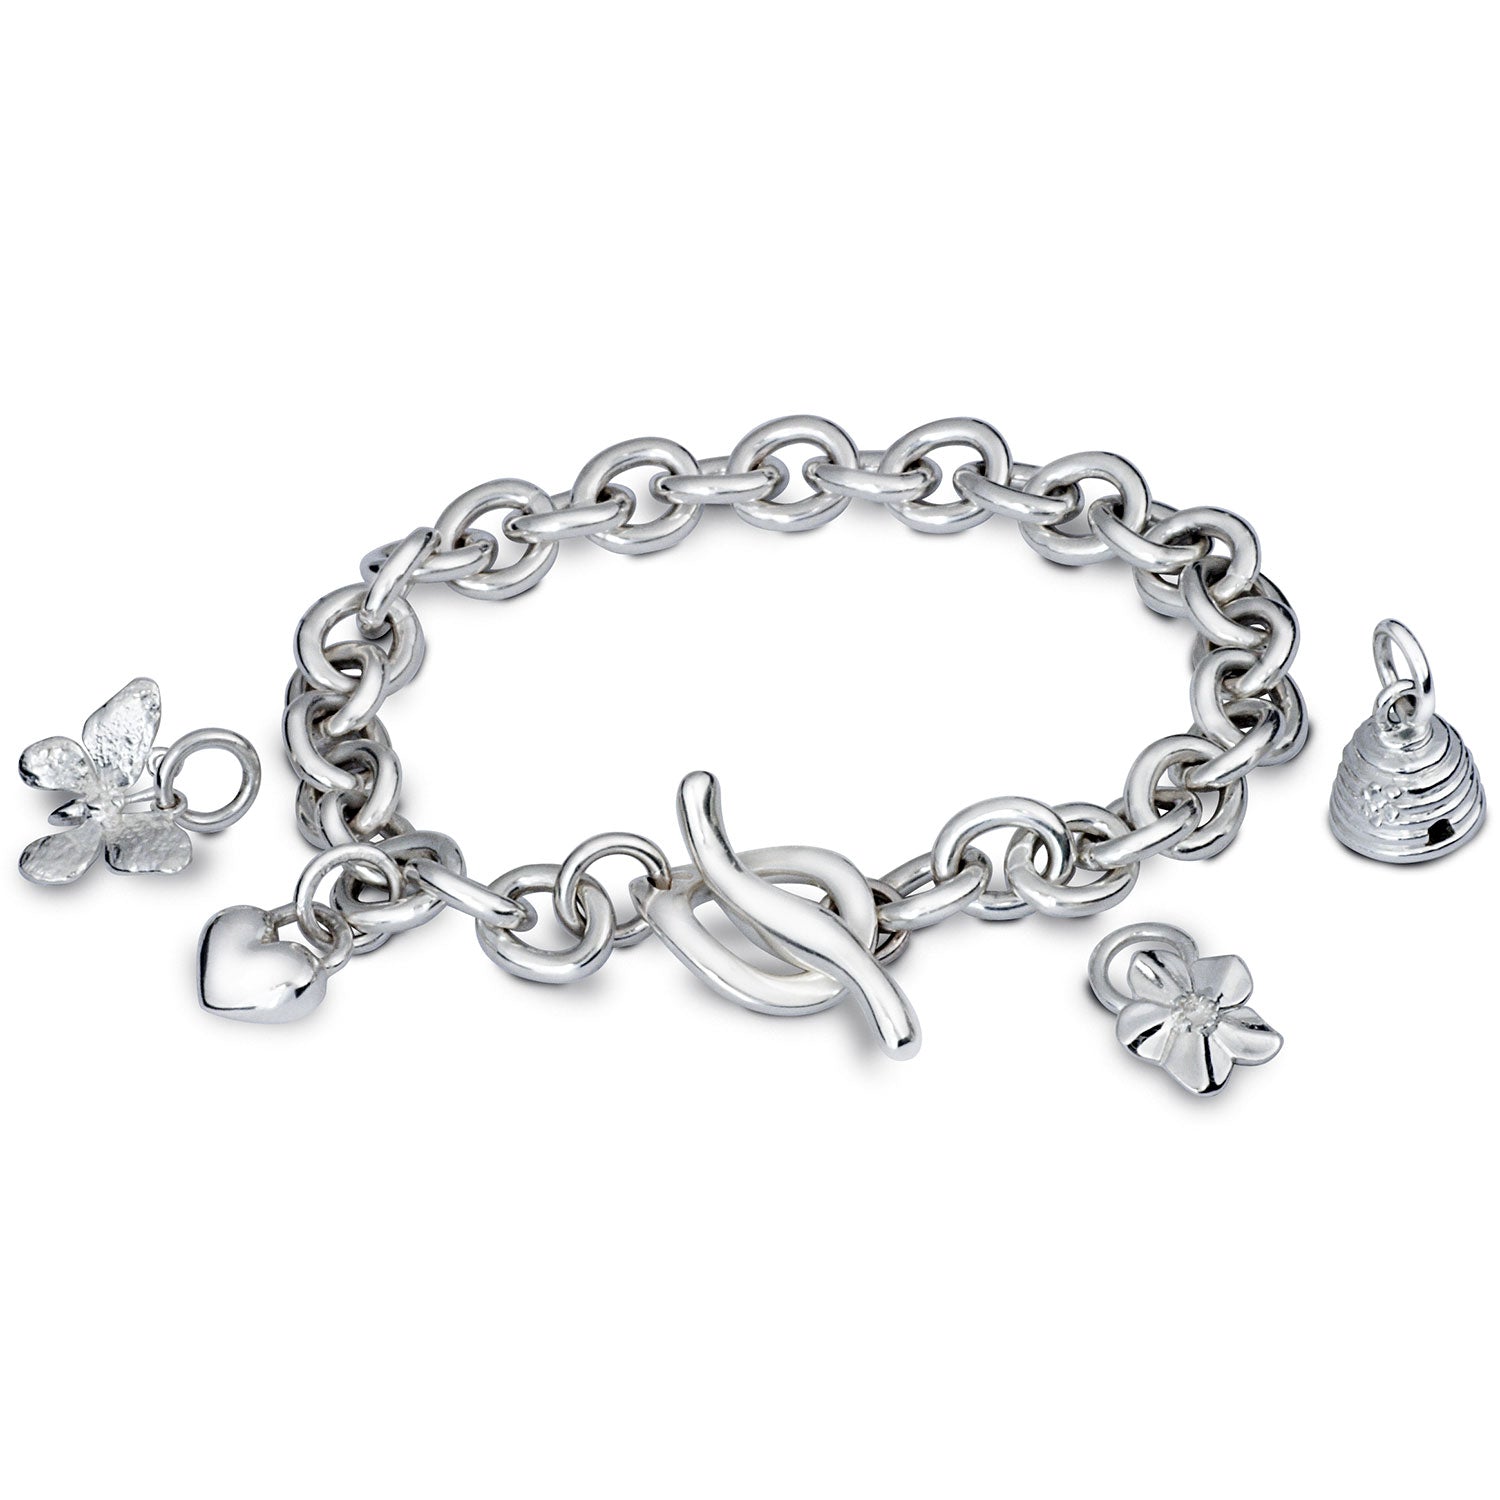 Getting Out Charm Bracelets On With Charm IT! {Review} - Mom and More